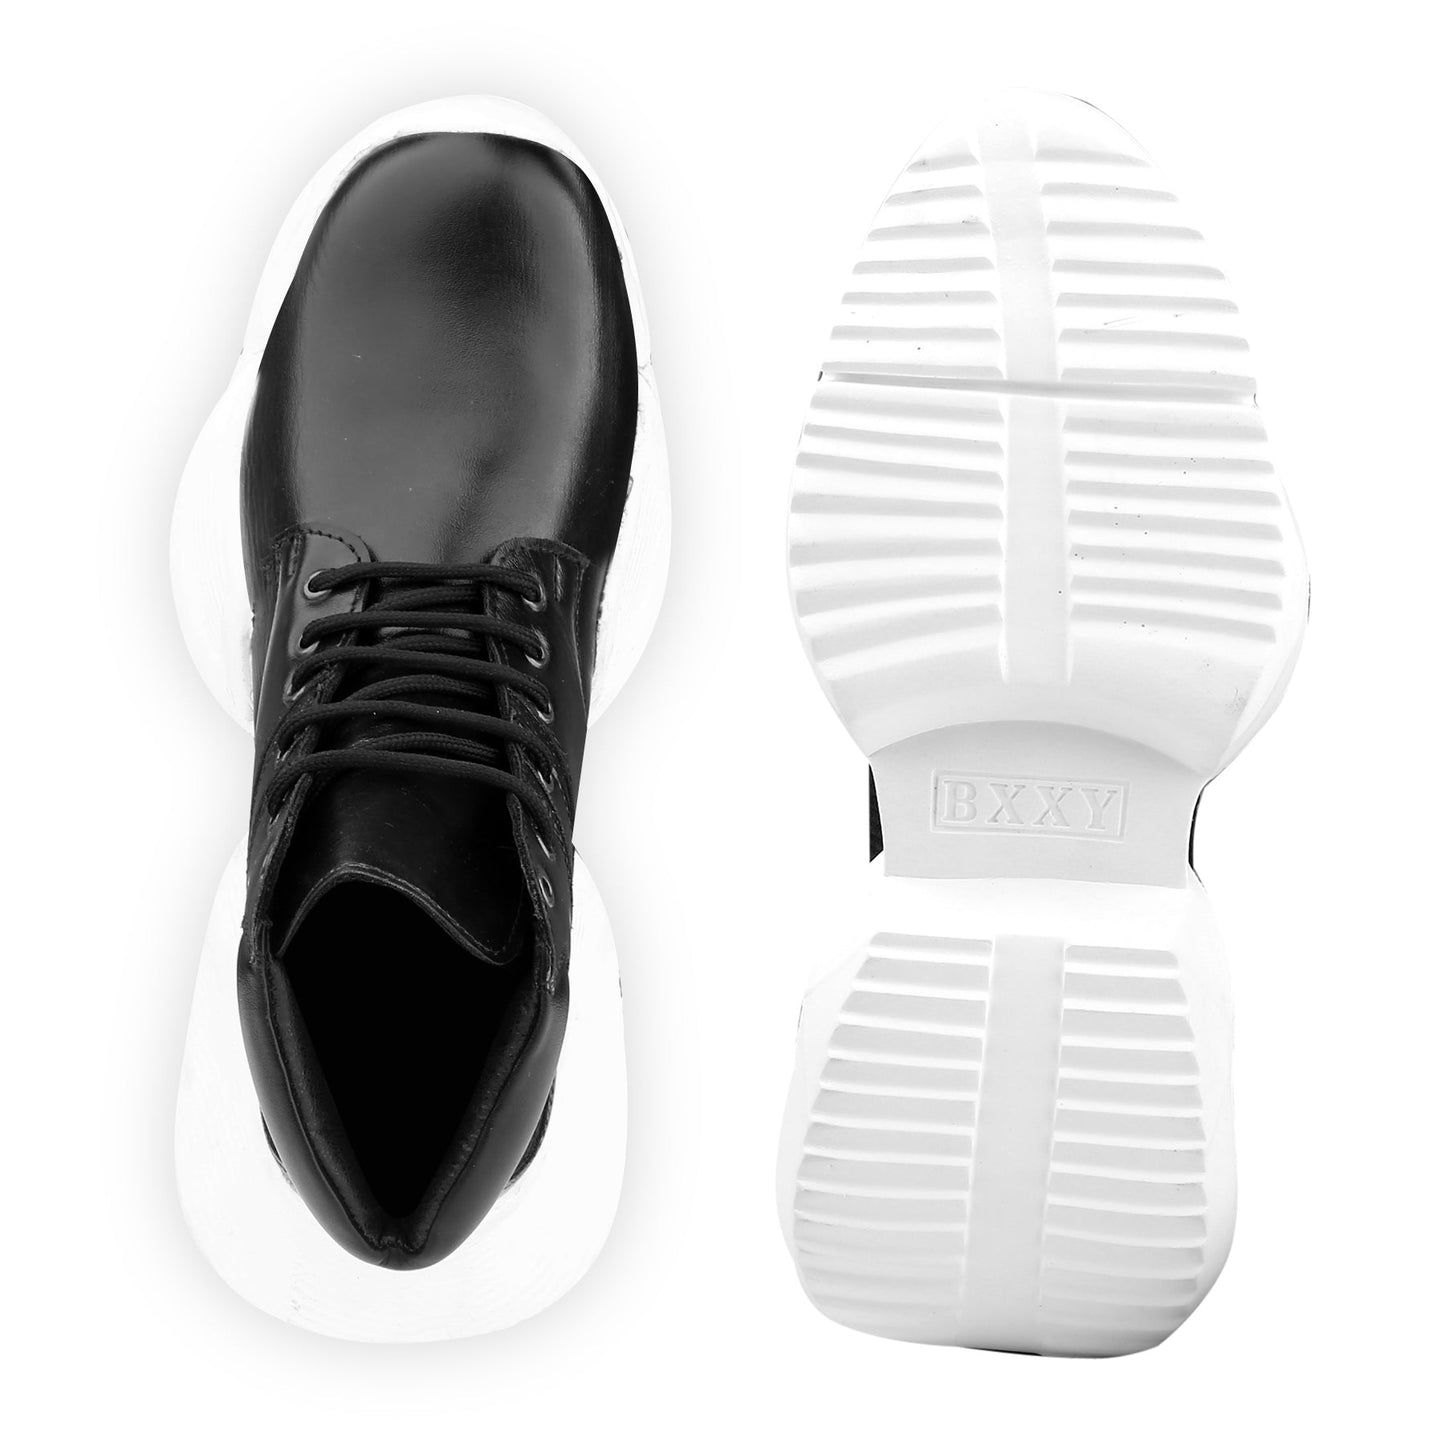 Bxxy's 4 Inch Hidden Height Increasing Ankle Lace-up Sporty Shoes for Men